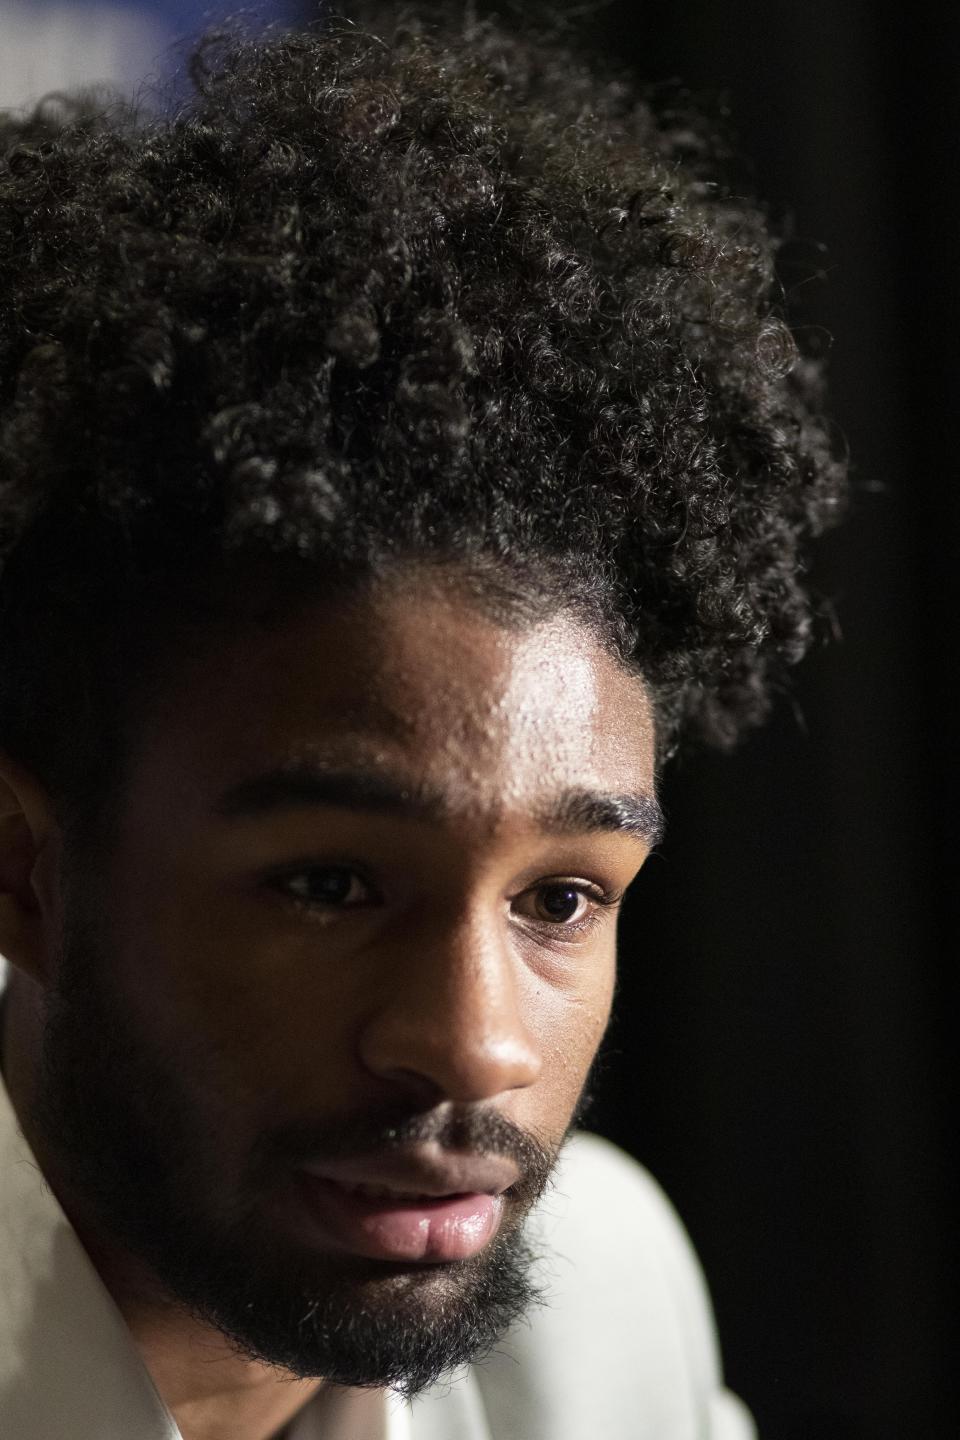 Coby White, a freshman basketball player from North Carolina, attends the NBA Draft media availability, Wednesday, June 19, 2019, in New York. The draft will be held Thursday, June 20. (AP Photo/Mark Lennihan)